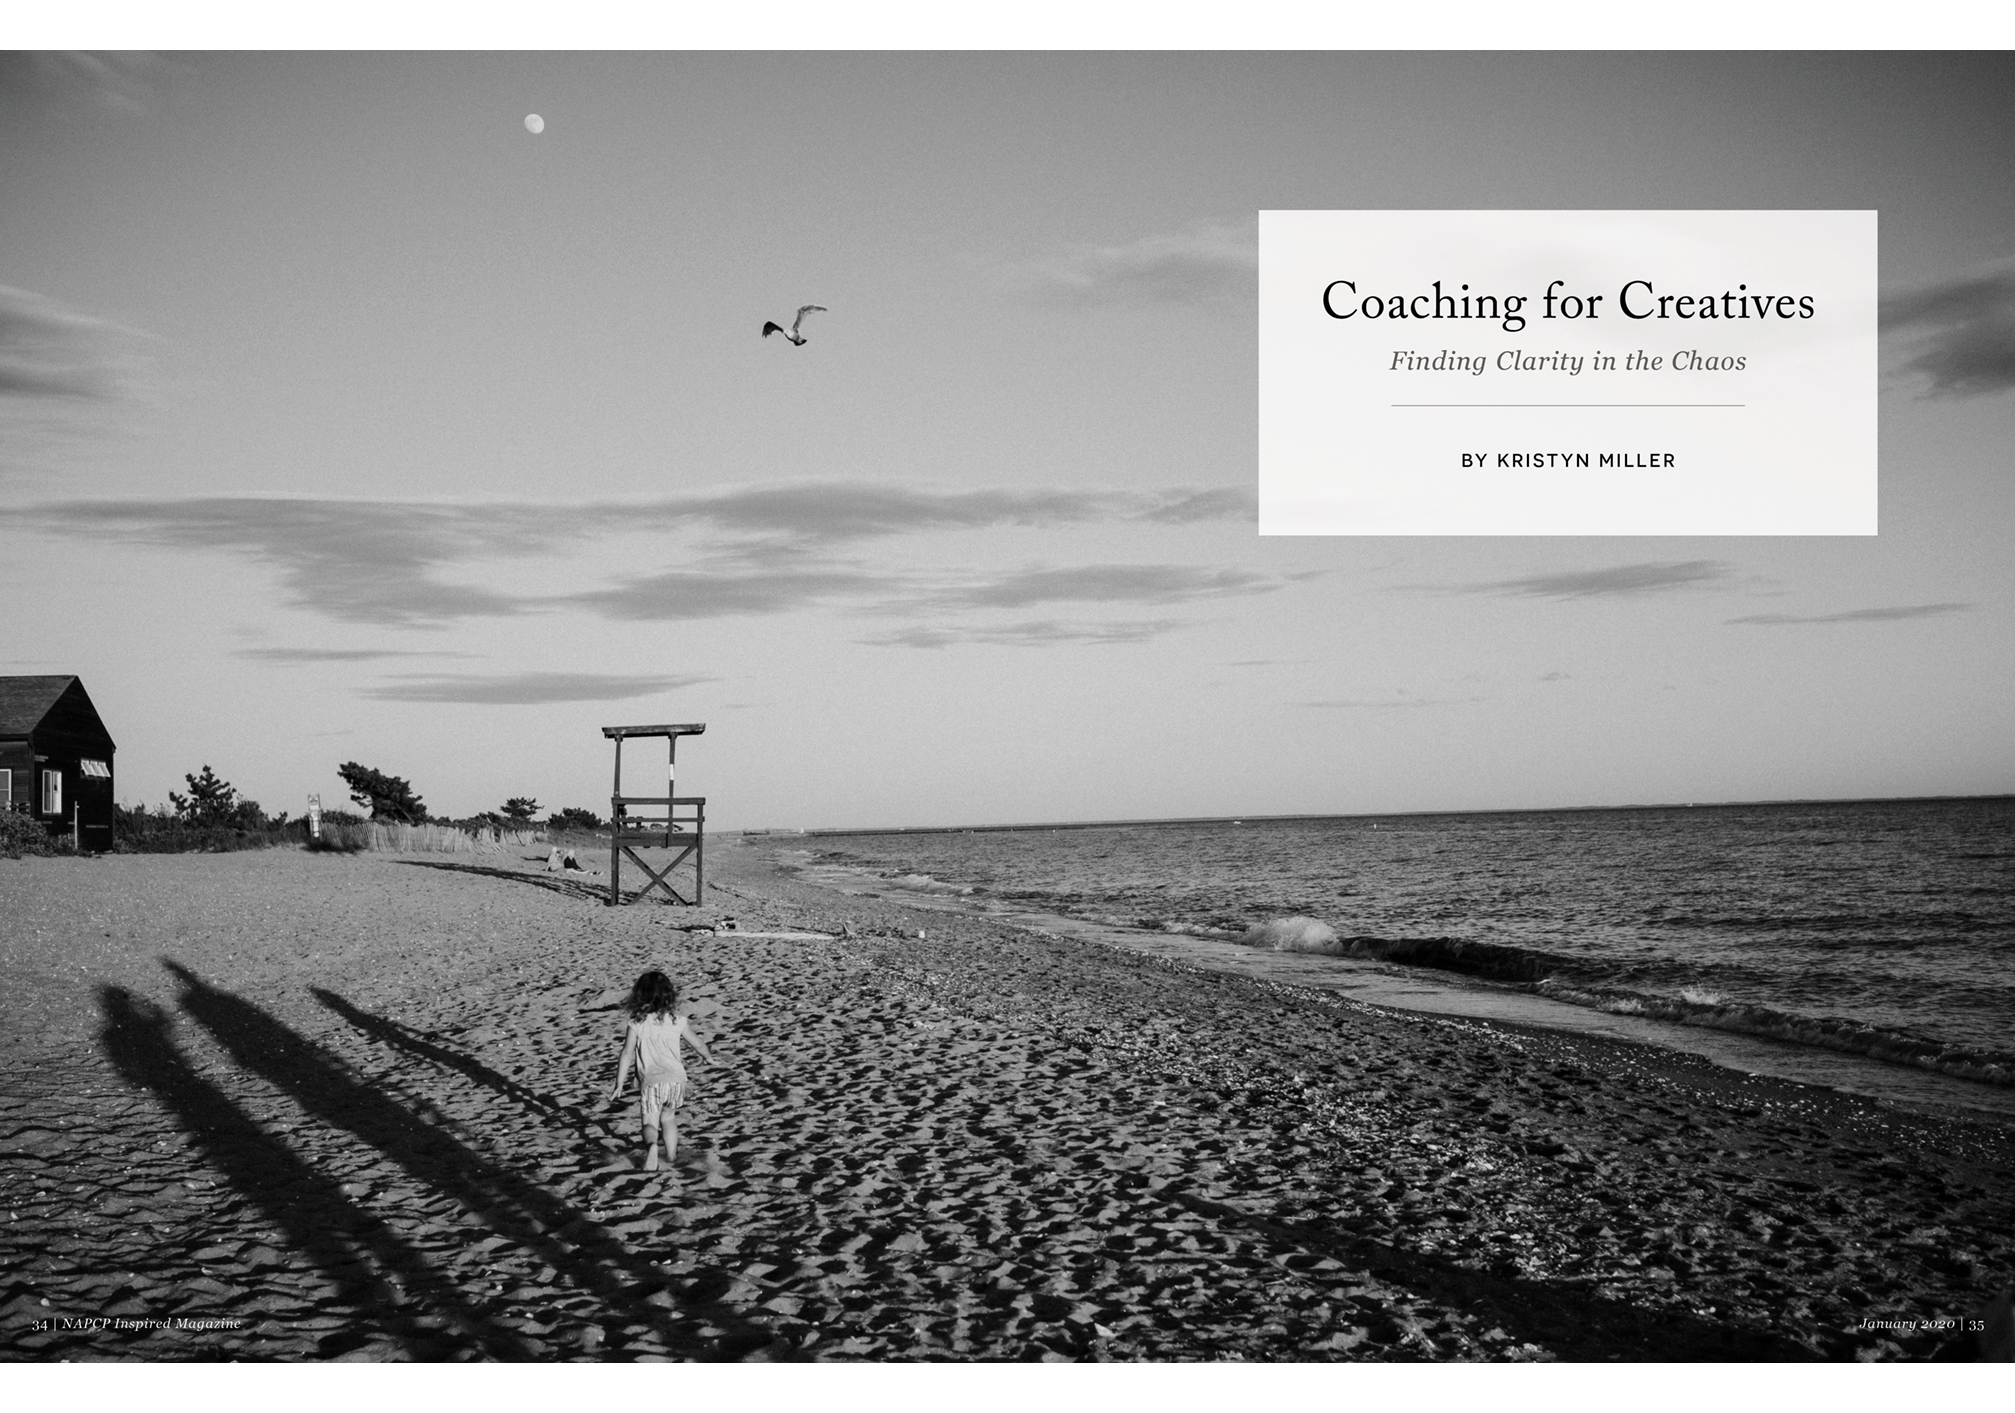 Coaching for Creatives, Finding Clarity in the Chaos, Kristyn Miller